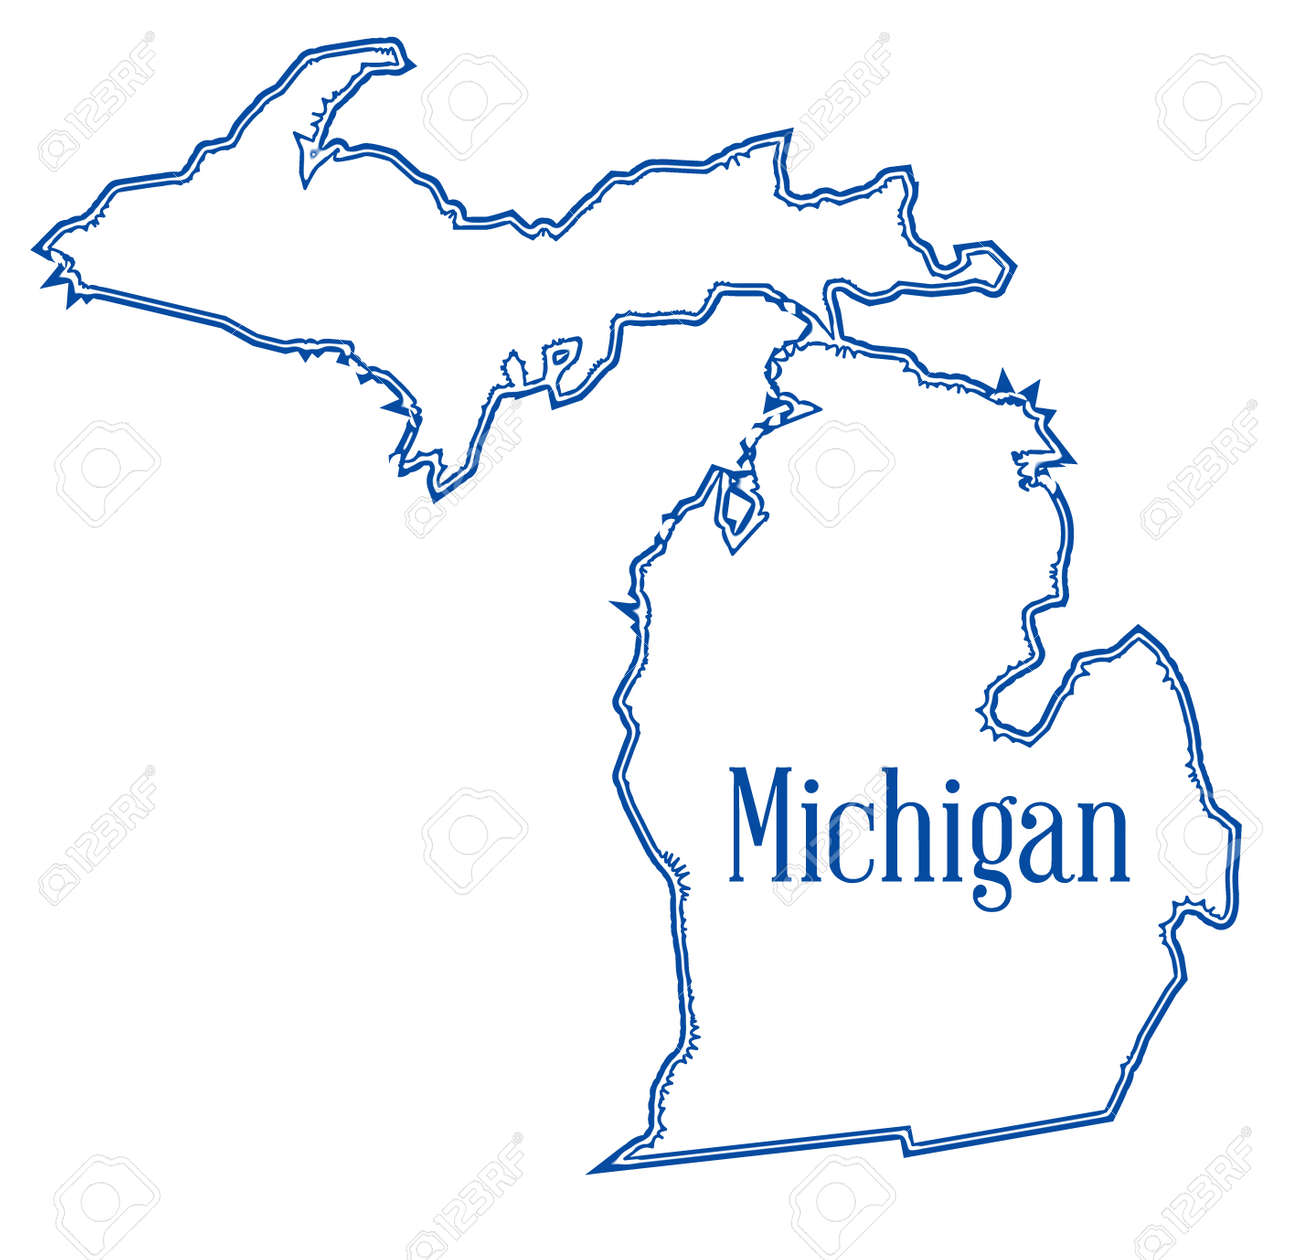 111262009-outline-map-of-the-state-of-michigan.jpg